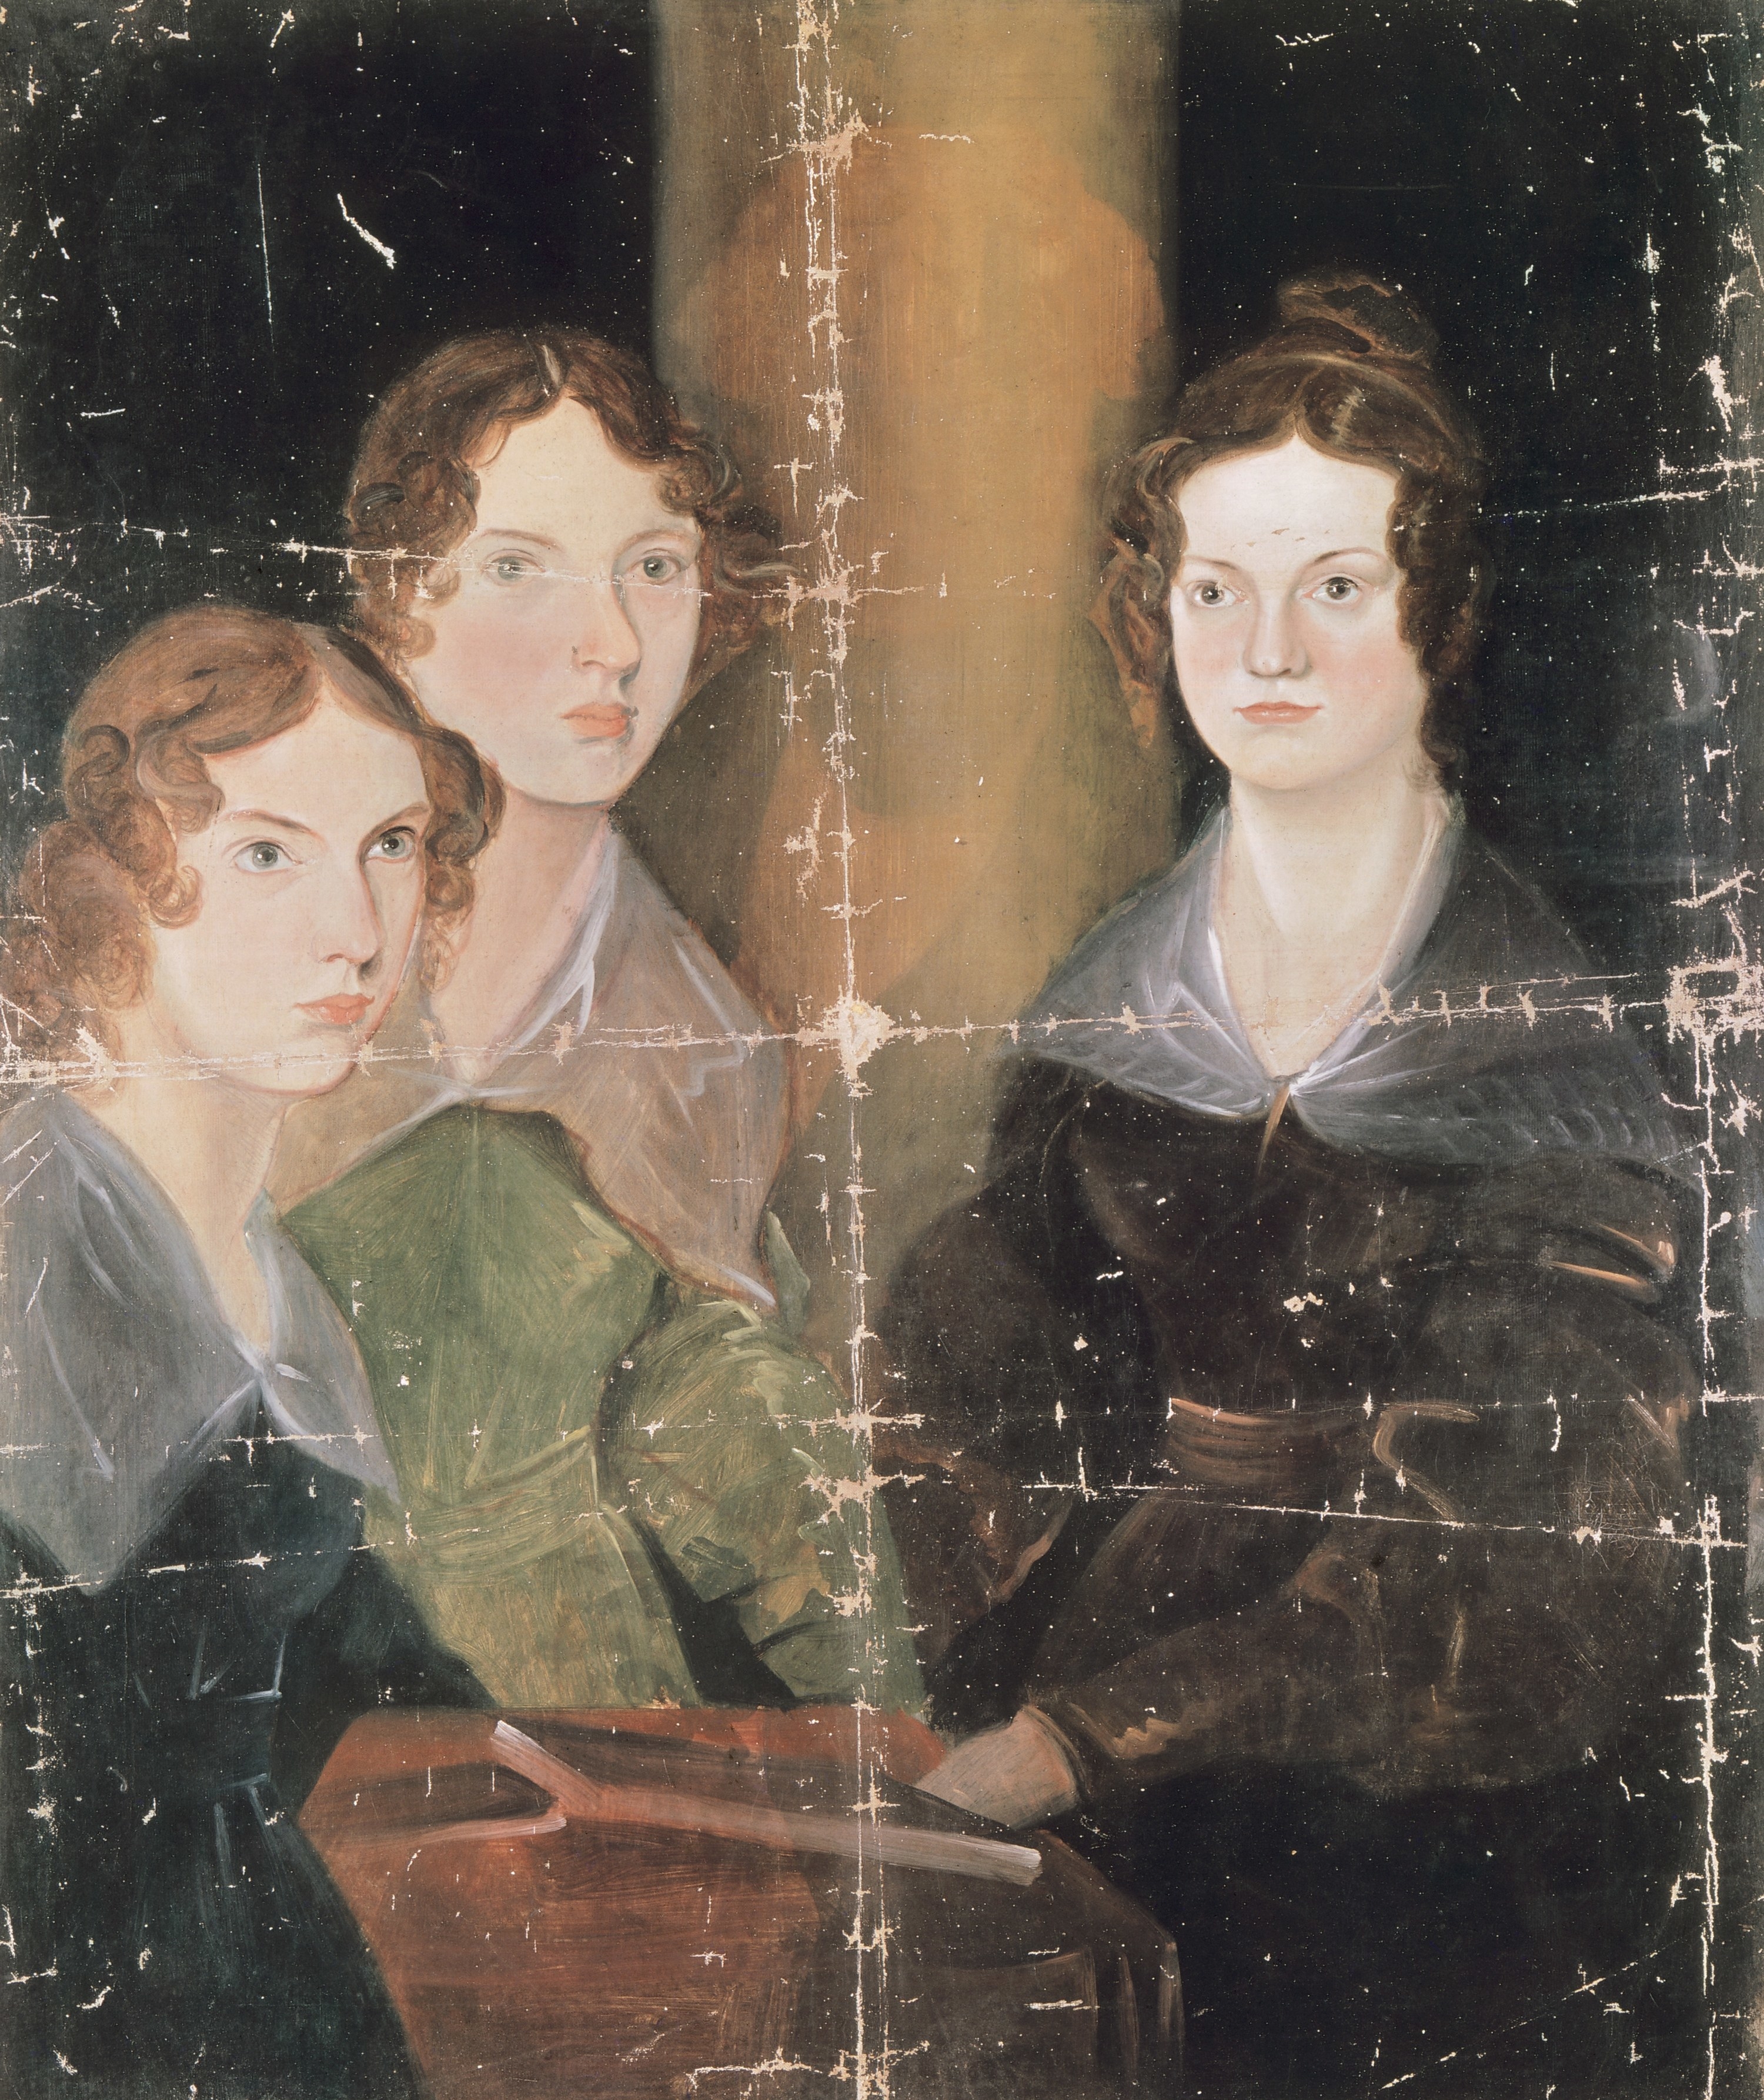 A portrait of the Bronte sisters, Charlotte, Emily, and Anne